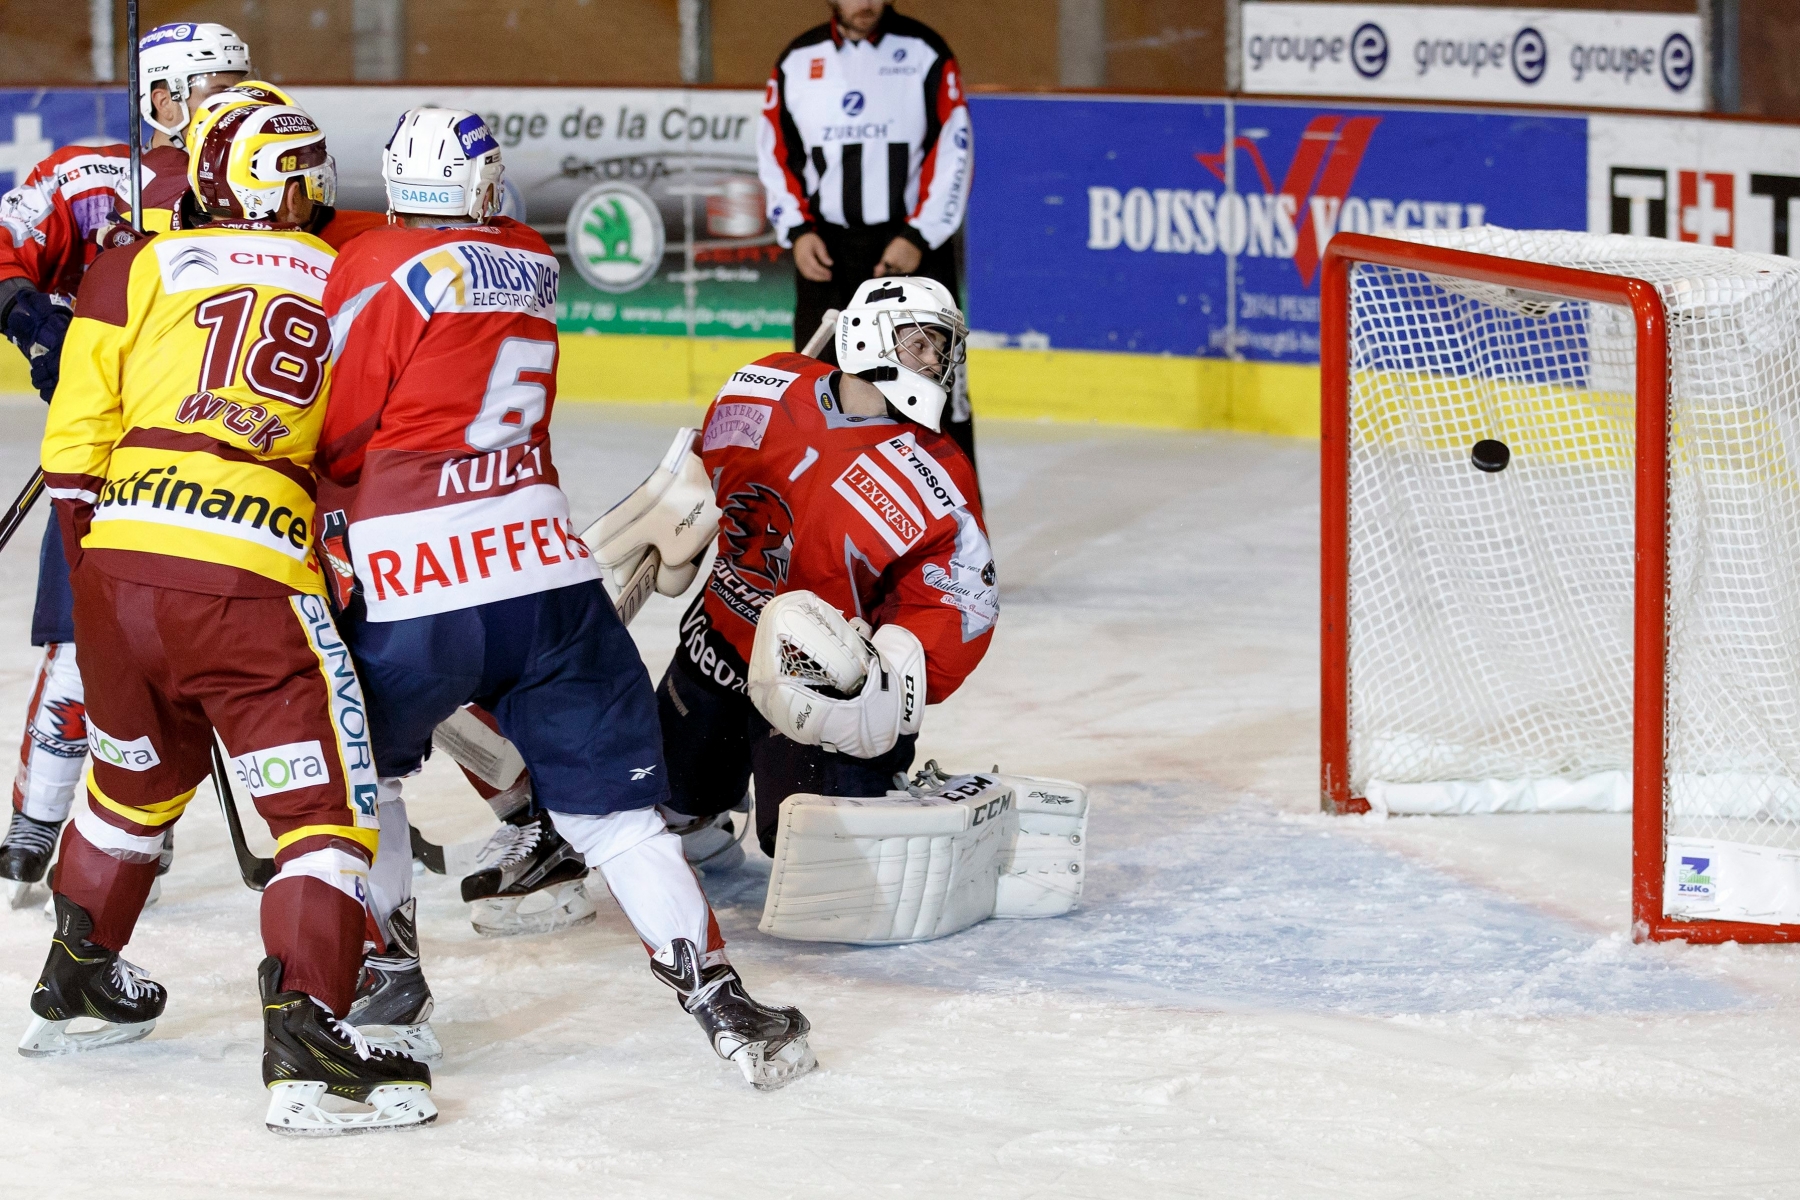 Geneve-Servette's Jeremy Wick, left, scores the 2:7 against Neuchatel's goaltender Lionel Favre, right, past Neuchatel's Florian Kolly, center, during the 16 round game of the Swiss Ice Hockey Cup between HC Universite Neuchatel and Geneve-Servette HC, at the Littoral ice stadium in Neuchatel, Switzerland, Wednesday, September 30, 2015. (KEYSTONE/Salvatore Di Nolfi) SWITZERLAND ICE HOCKEY CUP SERVETTE NEUCHATEL